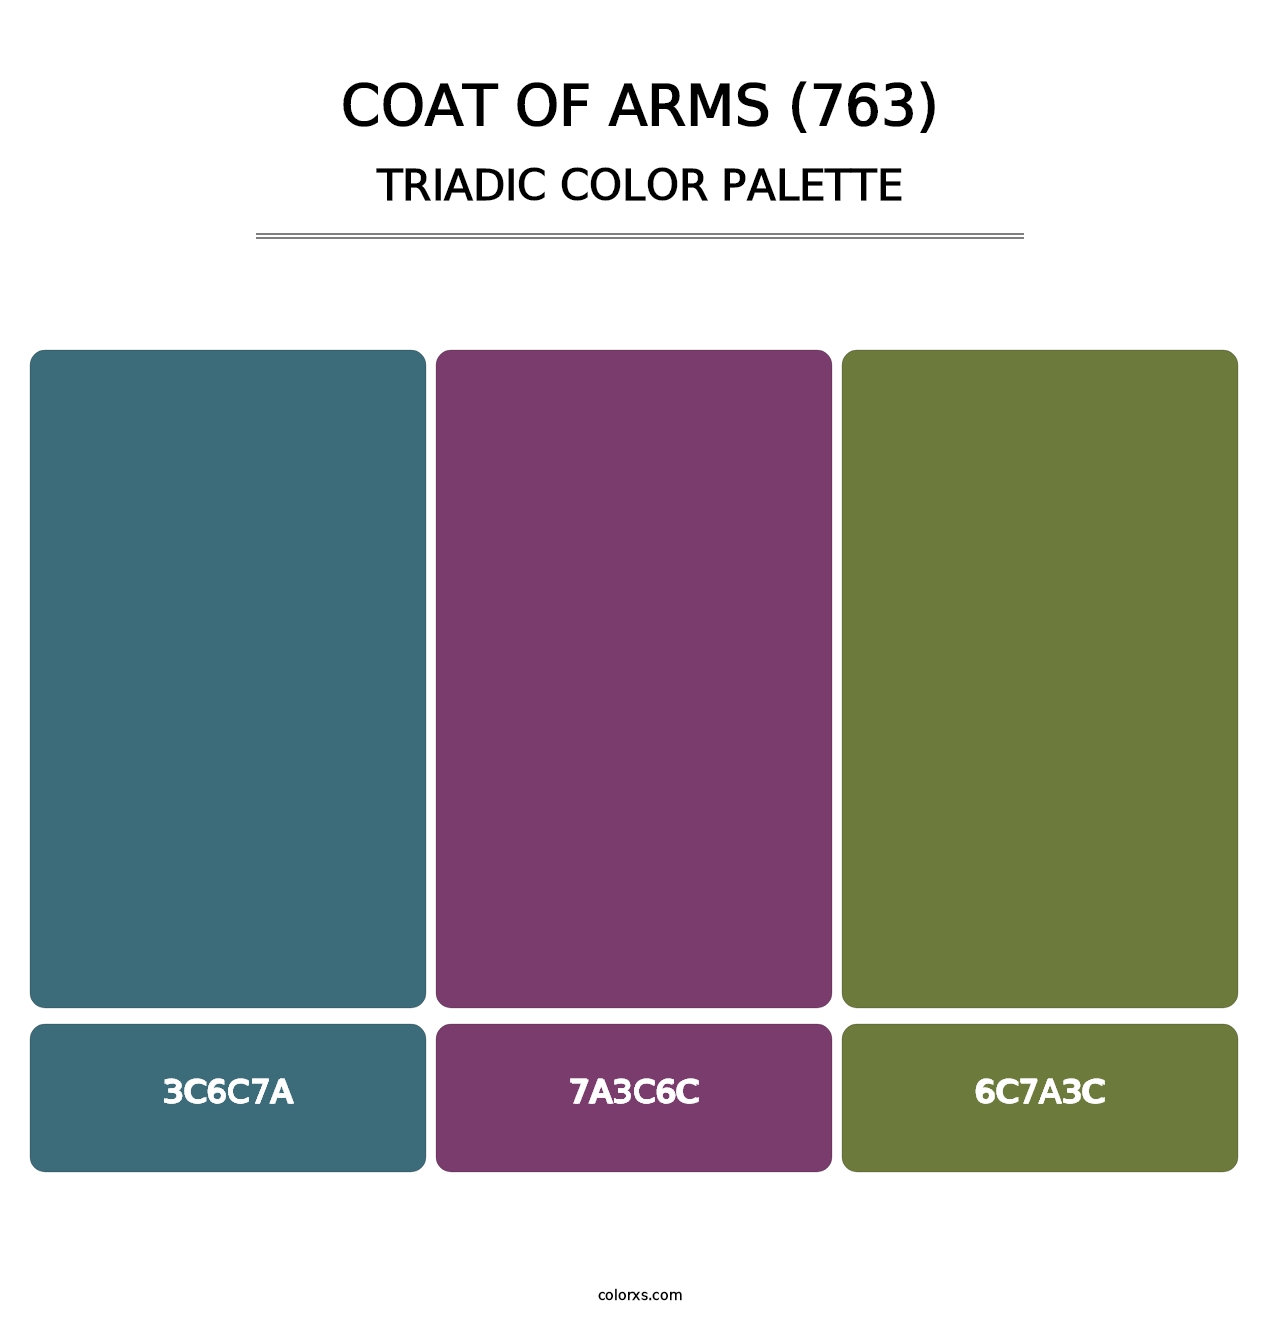 Coat of Arms (763) - Triadic Color Palette